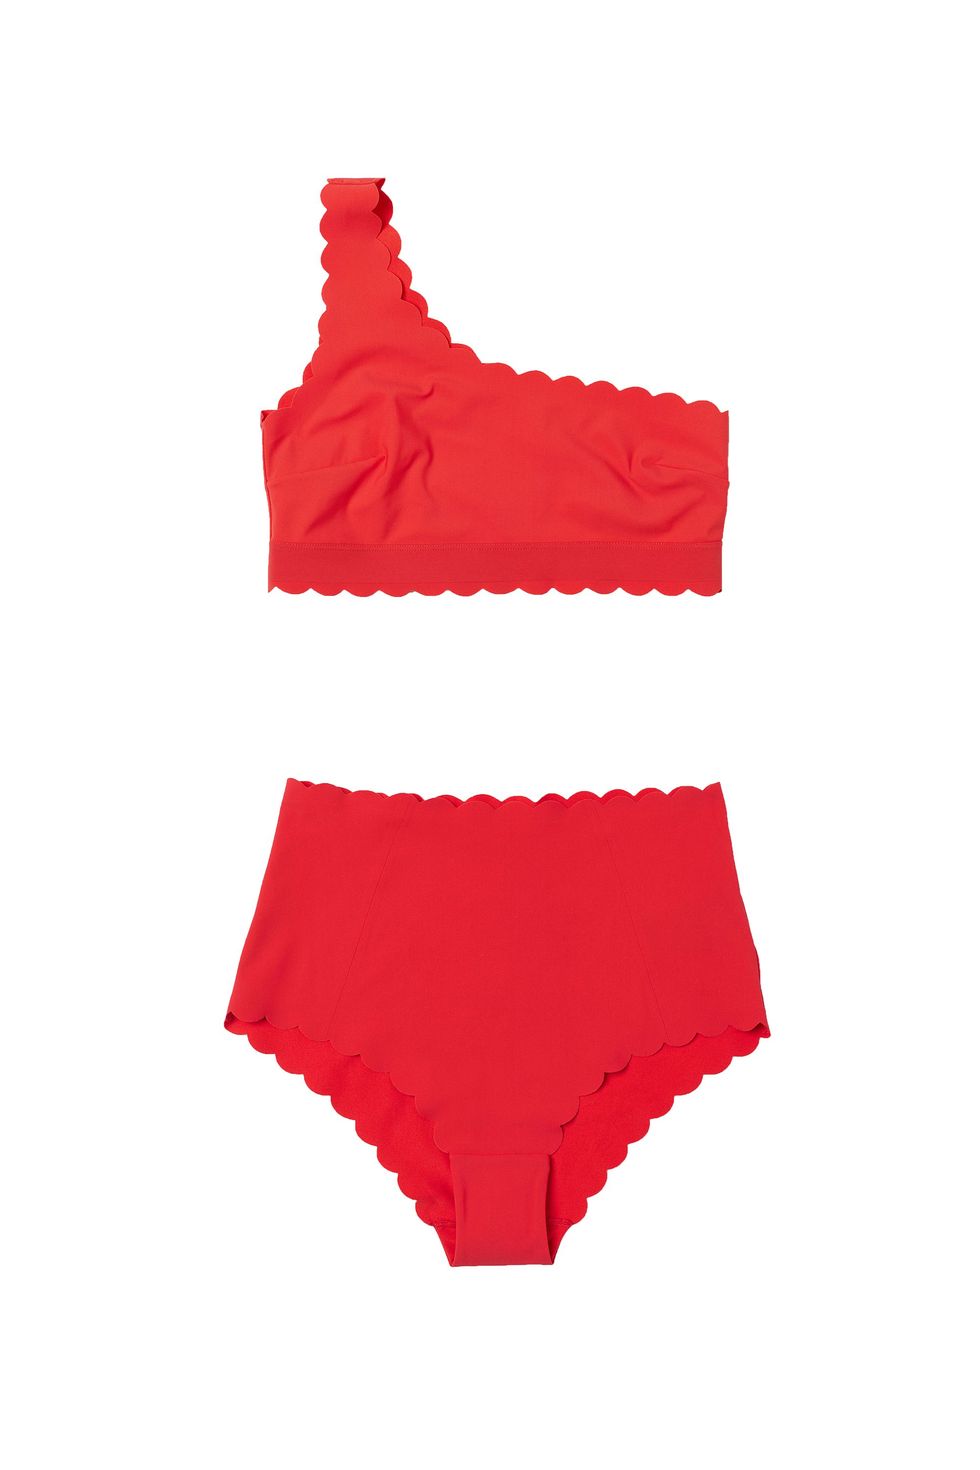 13 Modest Swimsuits, Because Not Everyone Is Down For Cheeky Bikinis